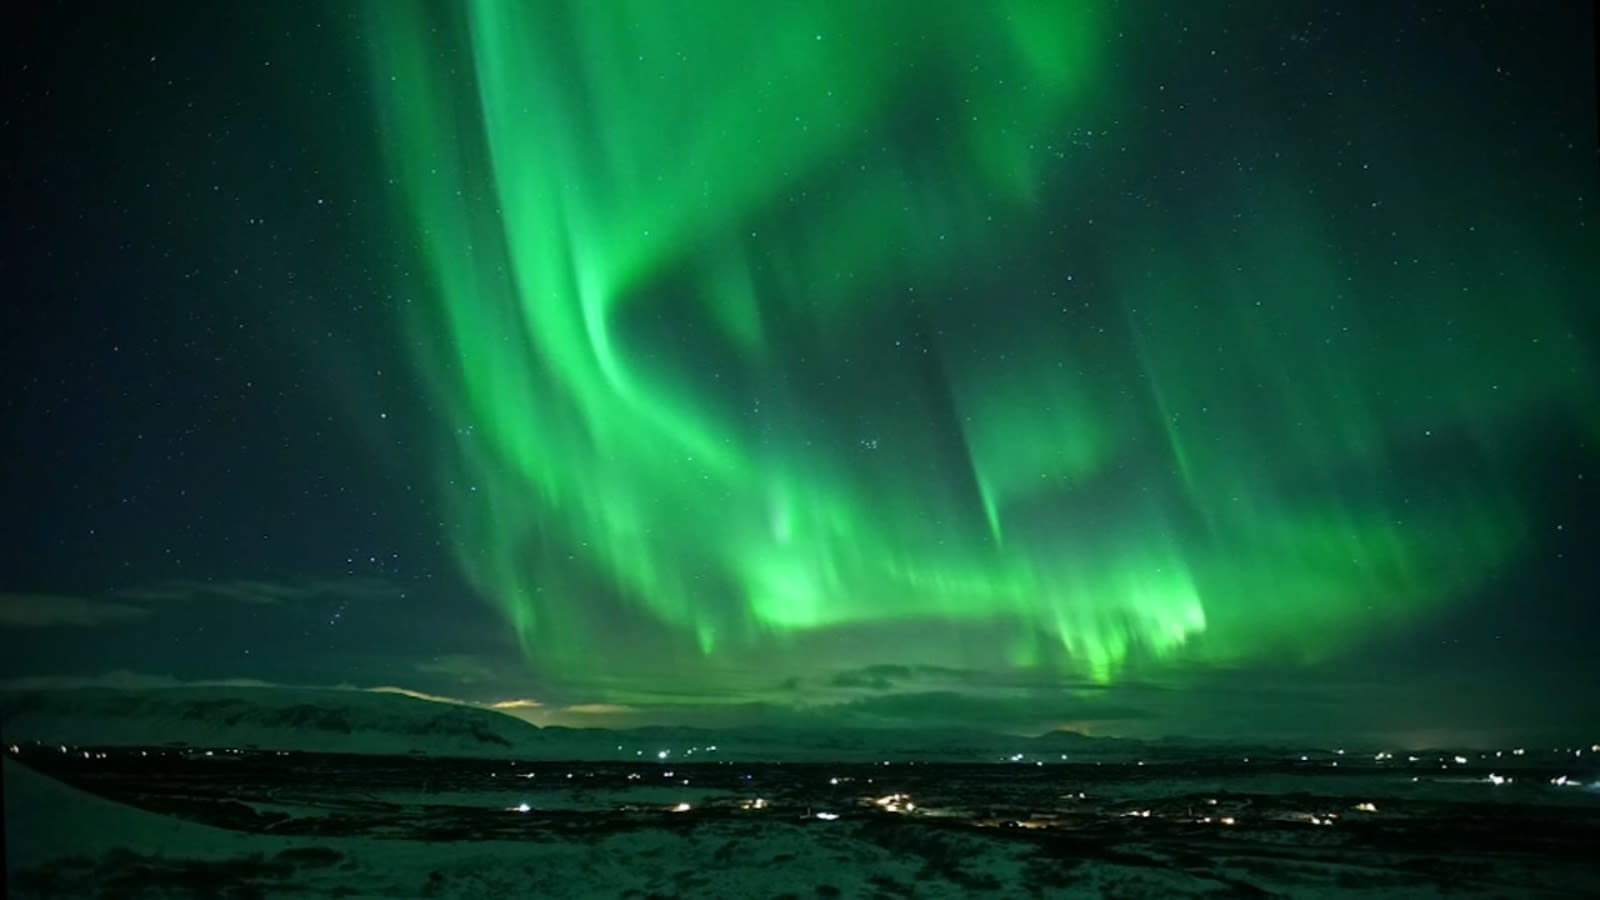 Northern Lights may be visible in parts of California overnight due to strong solar storm